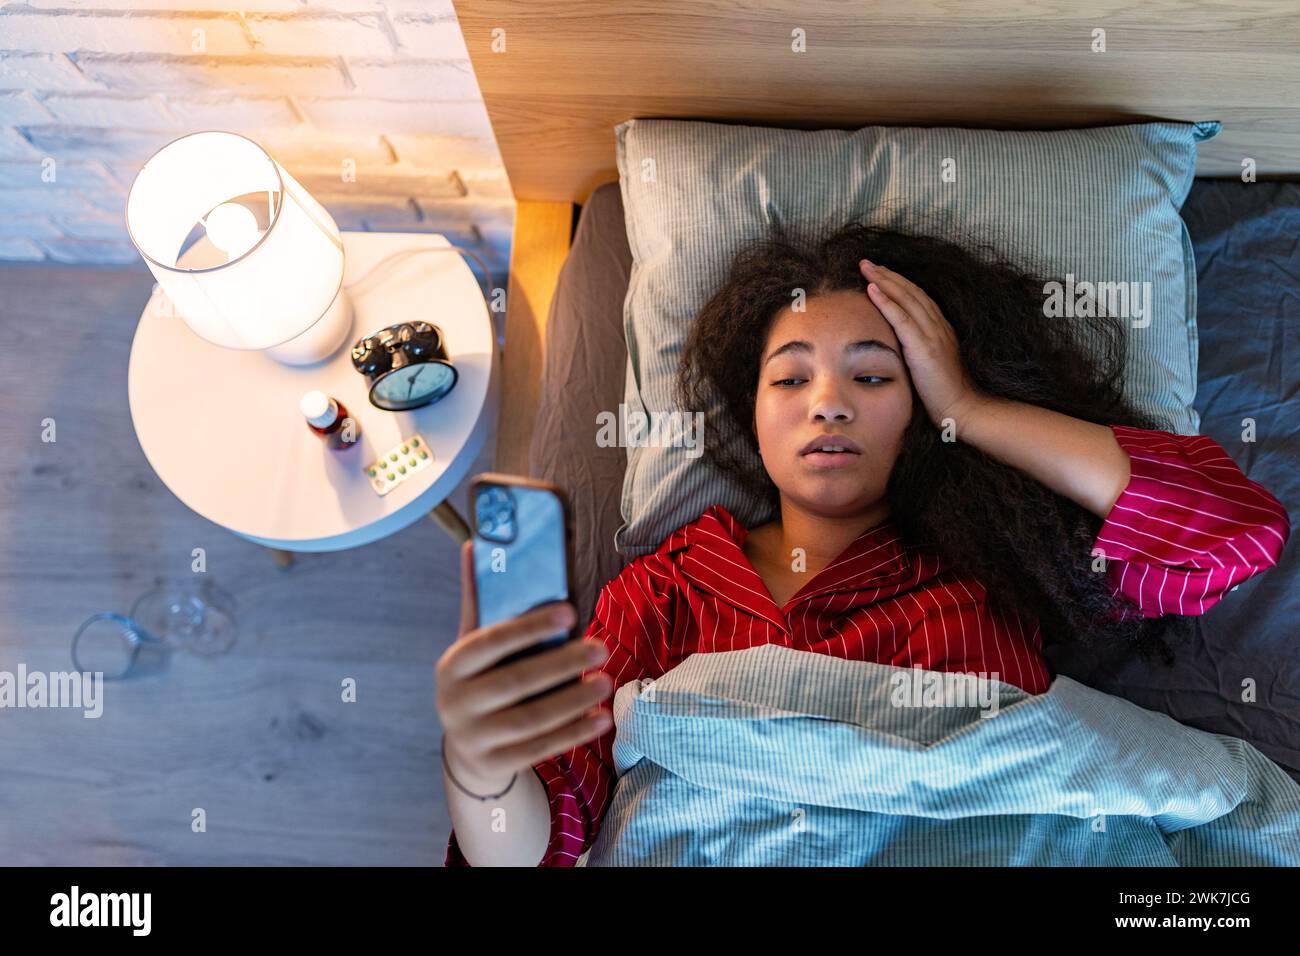 Woman can't fall asleep, insomnia a sleep problems. Concept of sleep routine and techniques for better sleep for adults. Stock Photo